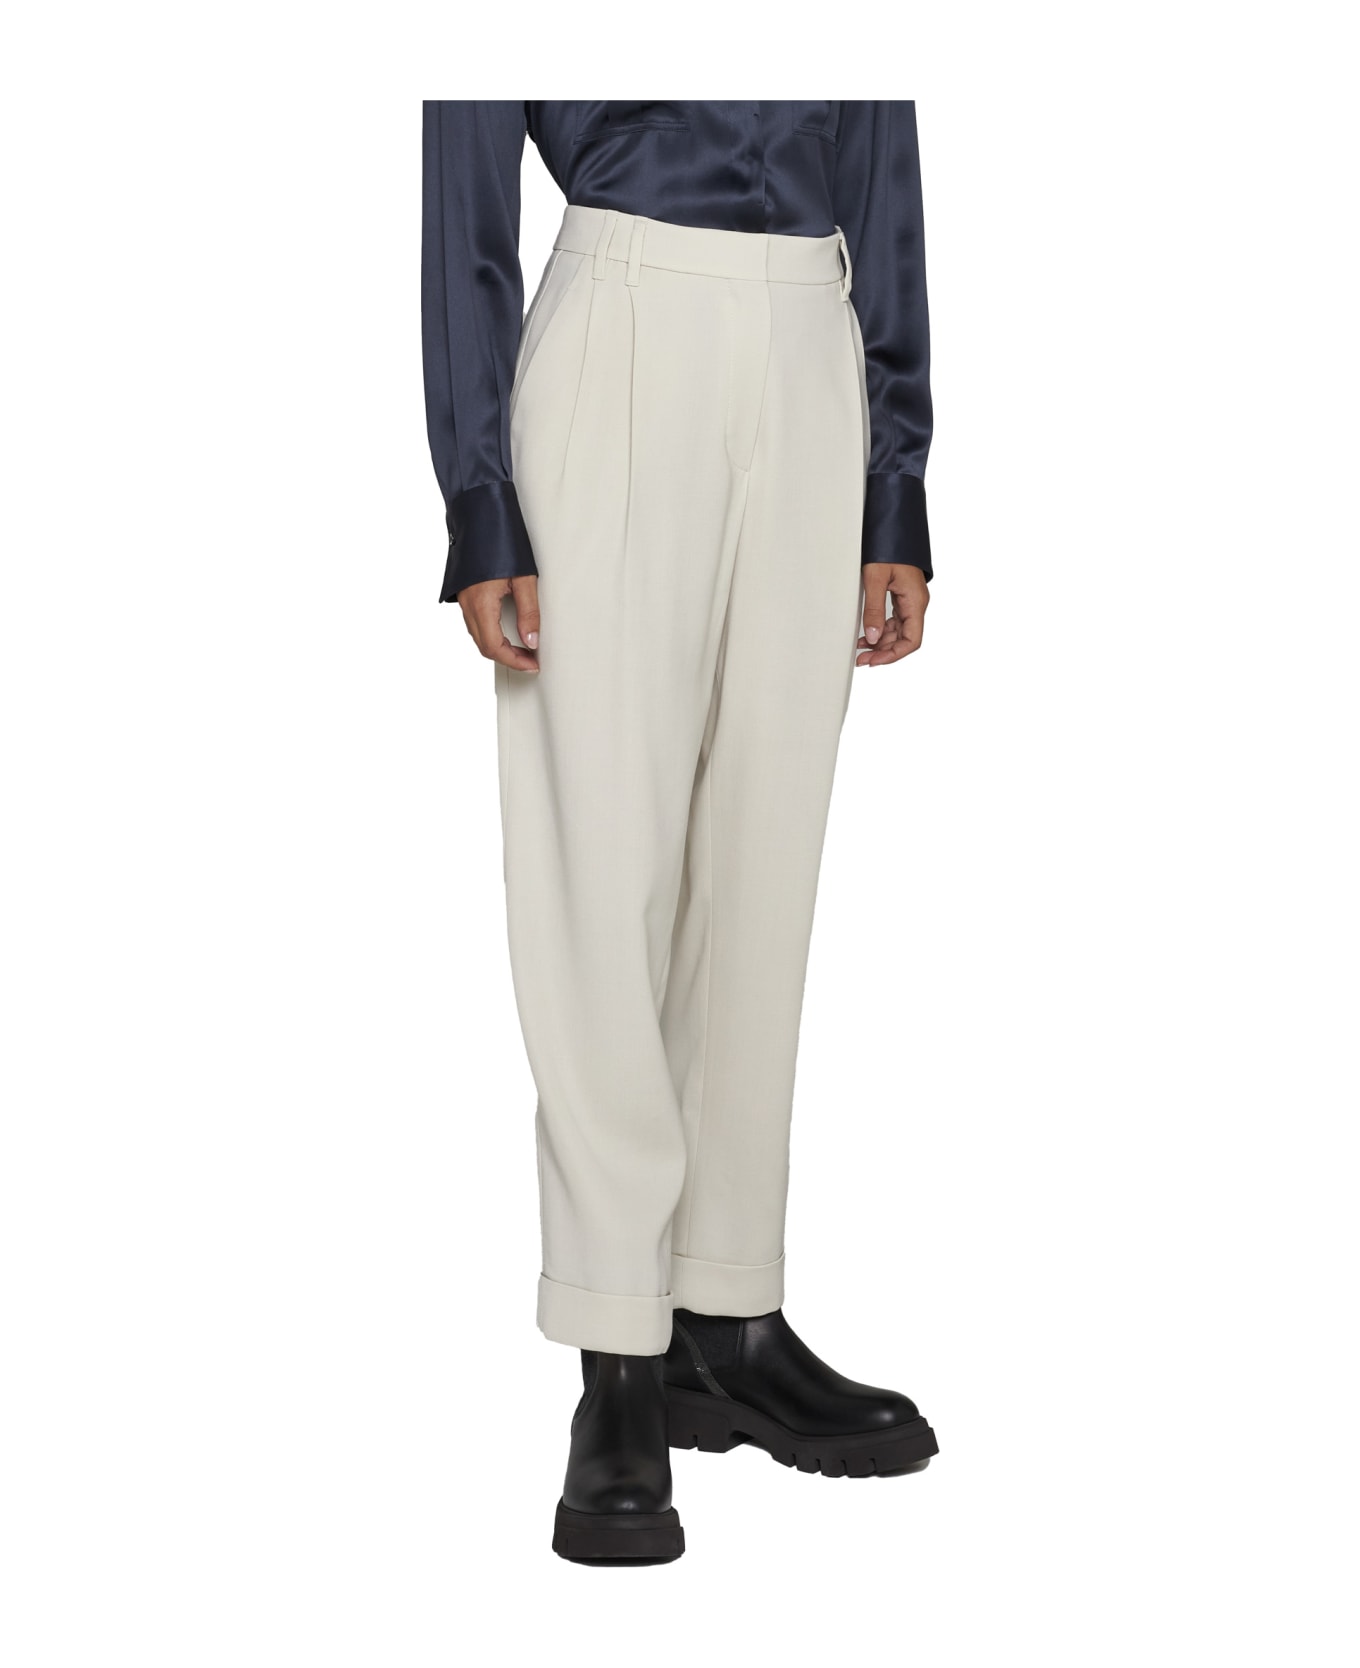 Brunello Cucinelli Sartorial Pants With Pence And Monile Detail - LATTE